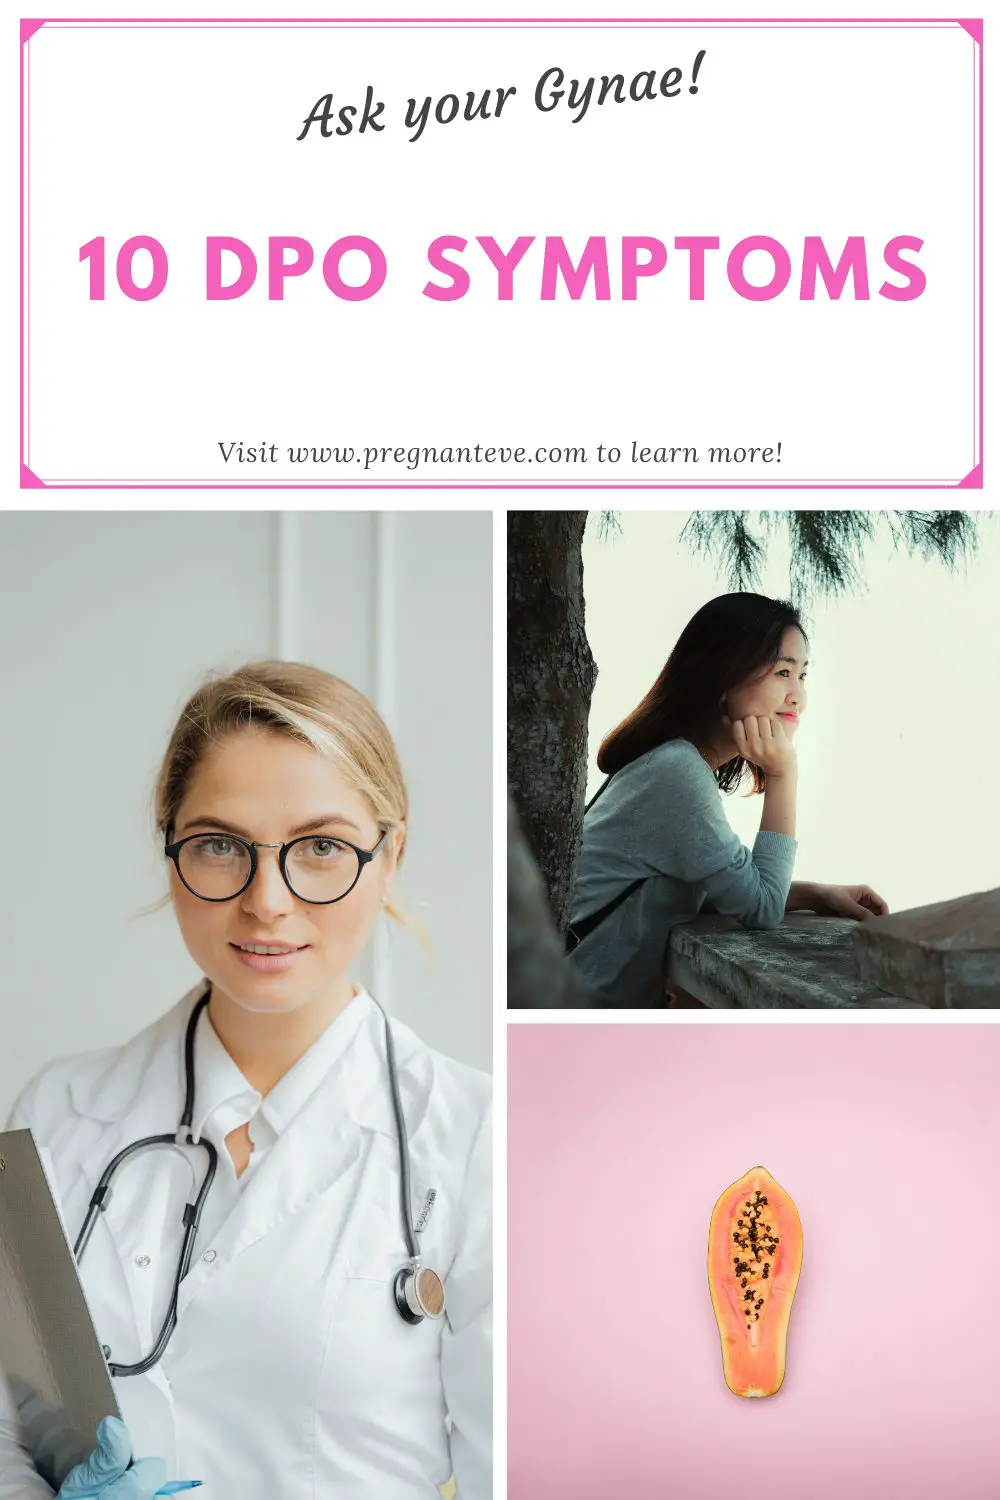 You must have heard of 10 DPO and 10 DPO symptoms but wondered what exactly these terms mean? The abbreviation DPO stands for Days Past Ovulation and sometimes referred to as days after ovulation. 